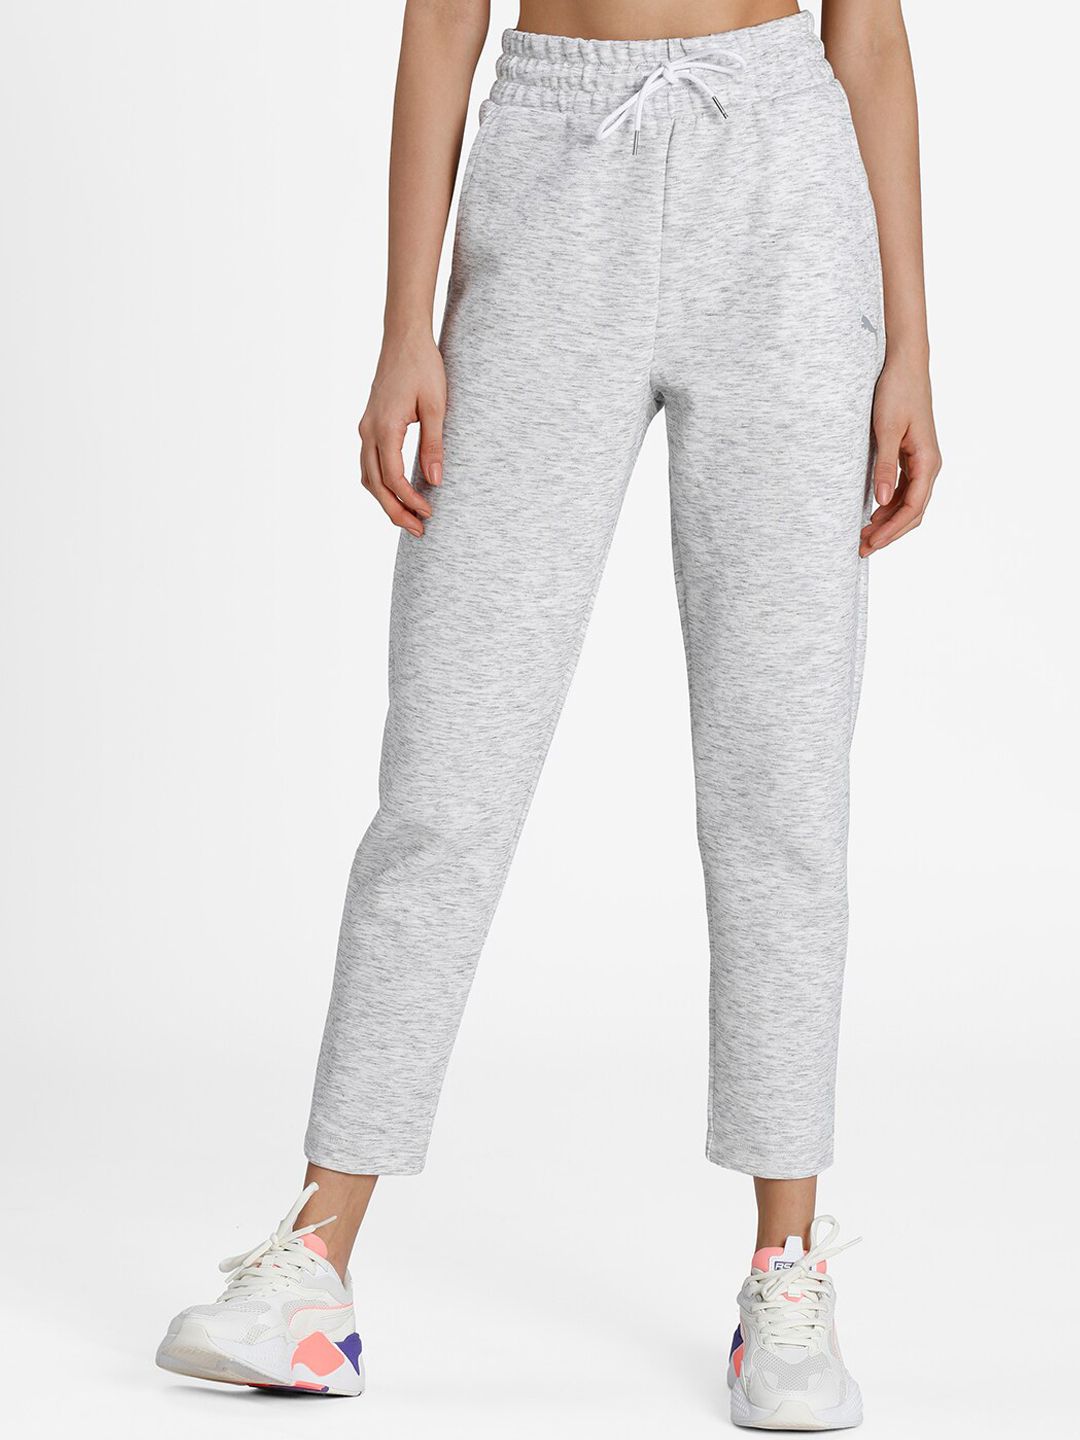 Puma Women Grey Melange Solid Slim Fit dryCELL Evostripe Relaxed SweatPants Price in India